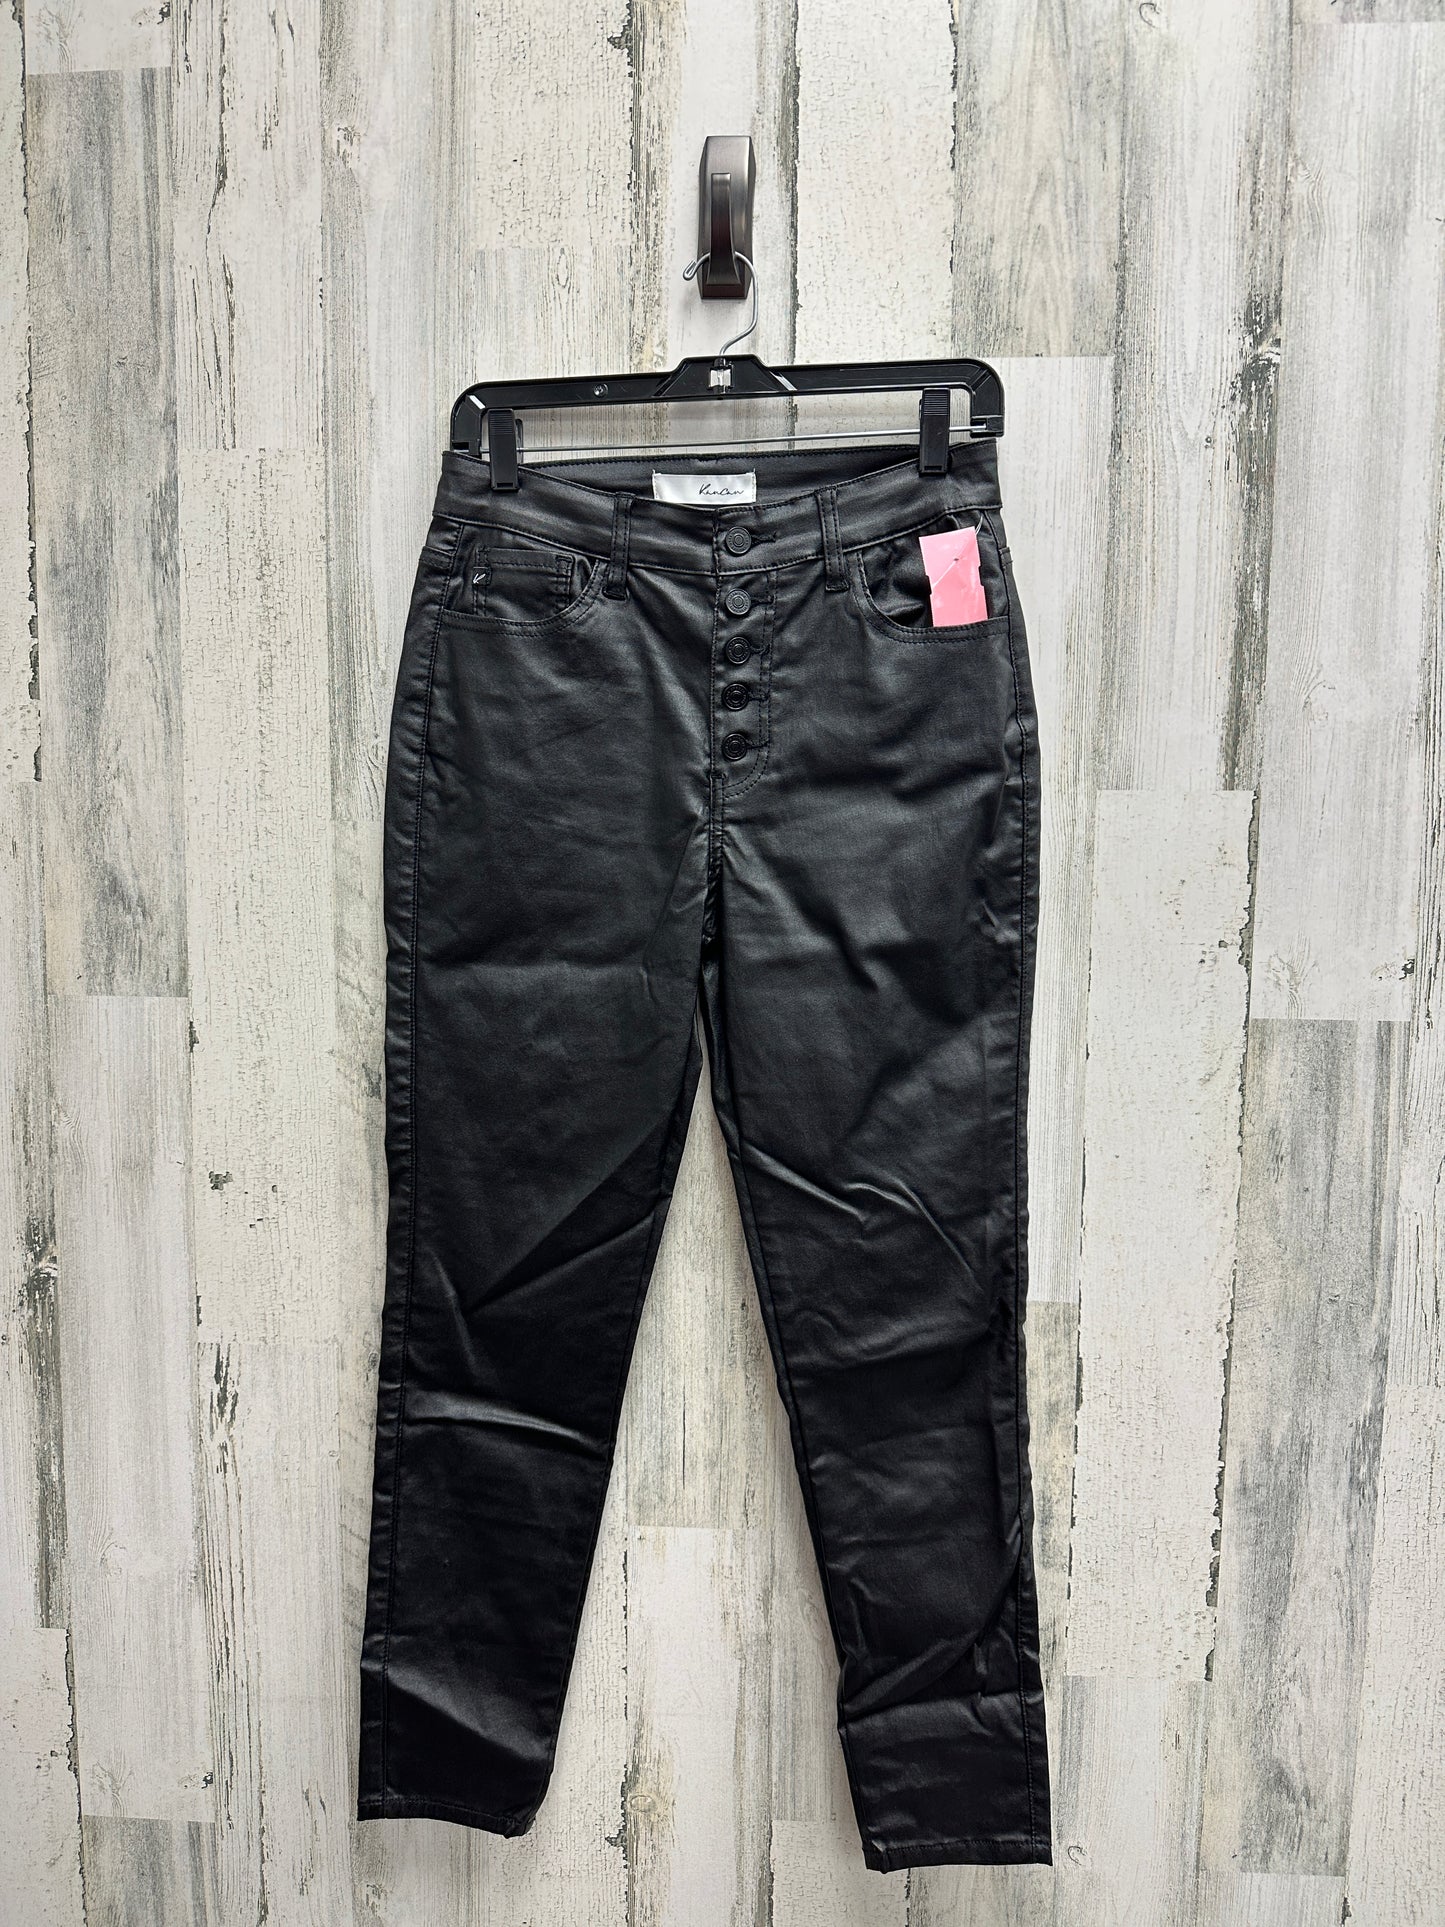 Jeans Skinny By Kancan  Size: 6